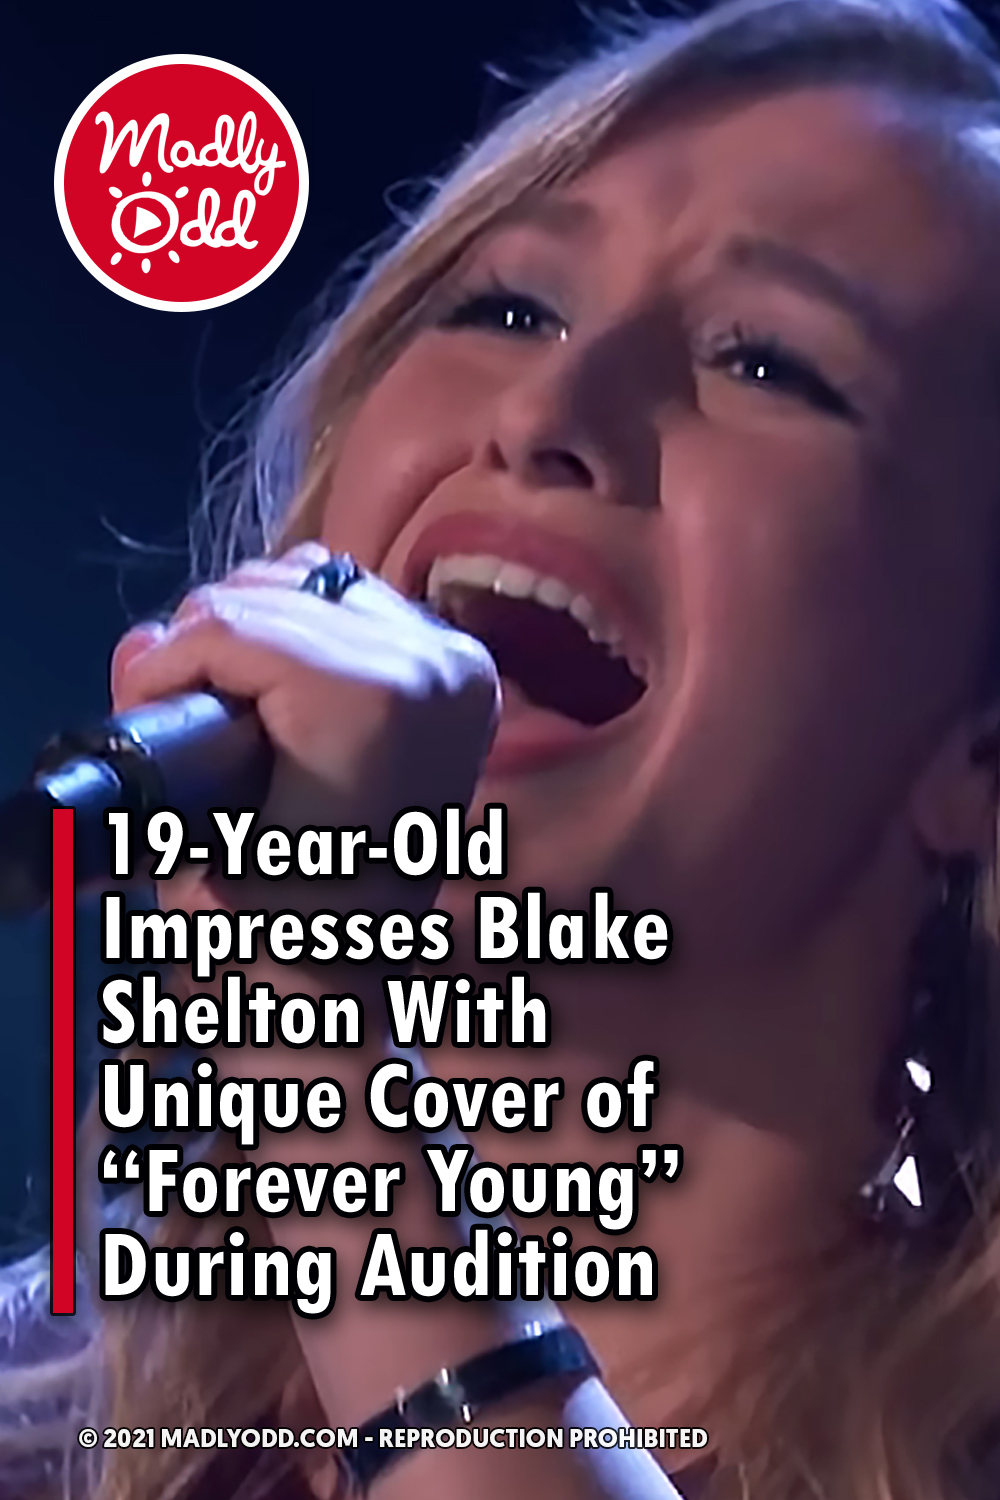 19-Year-Old Impresses Blake Shelton With Unique Cover of “Forever Young” During Audition